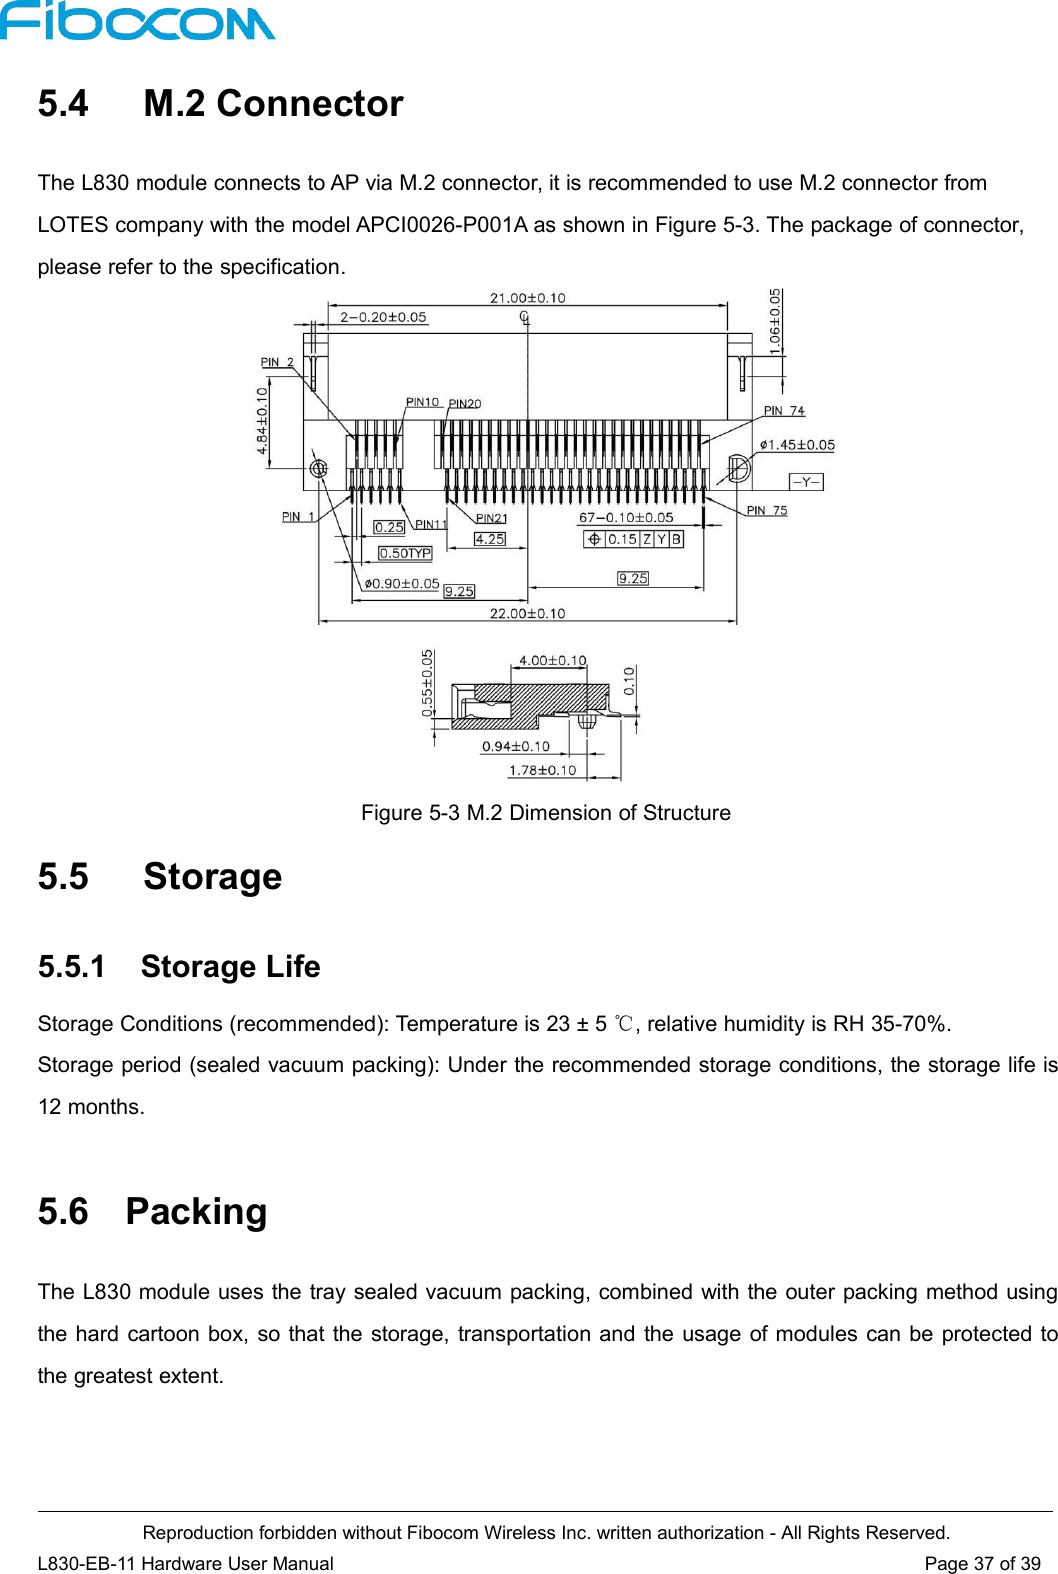 Reproduction forbidden without Fibocom Wireless Inc. written authorization - All Rights Reserved.L830-EB-11 Hardware User Manual Page 37 of 395.4 M.2 ConnectorThe L830 module connects to AP via M.2 connector, it is recommended to use M.2 connector fromLOTES company with the model APCI0026-P001A as shown in Figure 5-3. The package of connector,please refer to the specification.Figure 5-3 M.2 Dimension of Structure5.5 Storage5.5.1 Storage LifeStorage Conditions (recommended): Temperature is 23 ± 5 ℃, relative humidity is RH 35-70%.Storage period (sealed vacuum packing): Under the recommended storage conditions, the storage life is12 months.5.6 PackingThe L830 module uses the tray sealed vacuum packing, combined with the outer packing method usingthe hard cartoon box, so that the storage, transportation and the usage of modules can be protected tothe greatest extent.